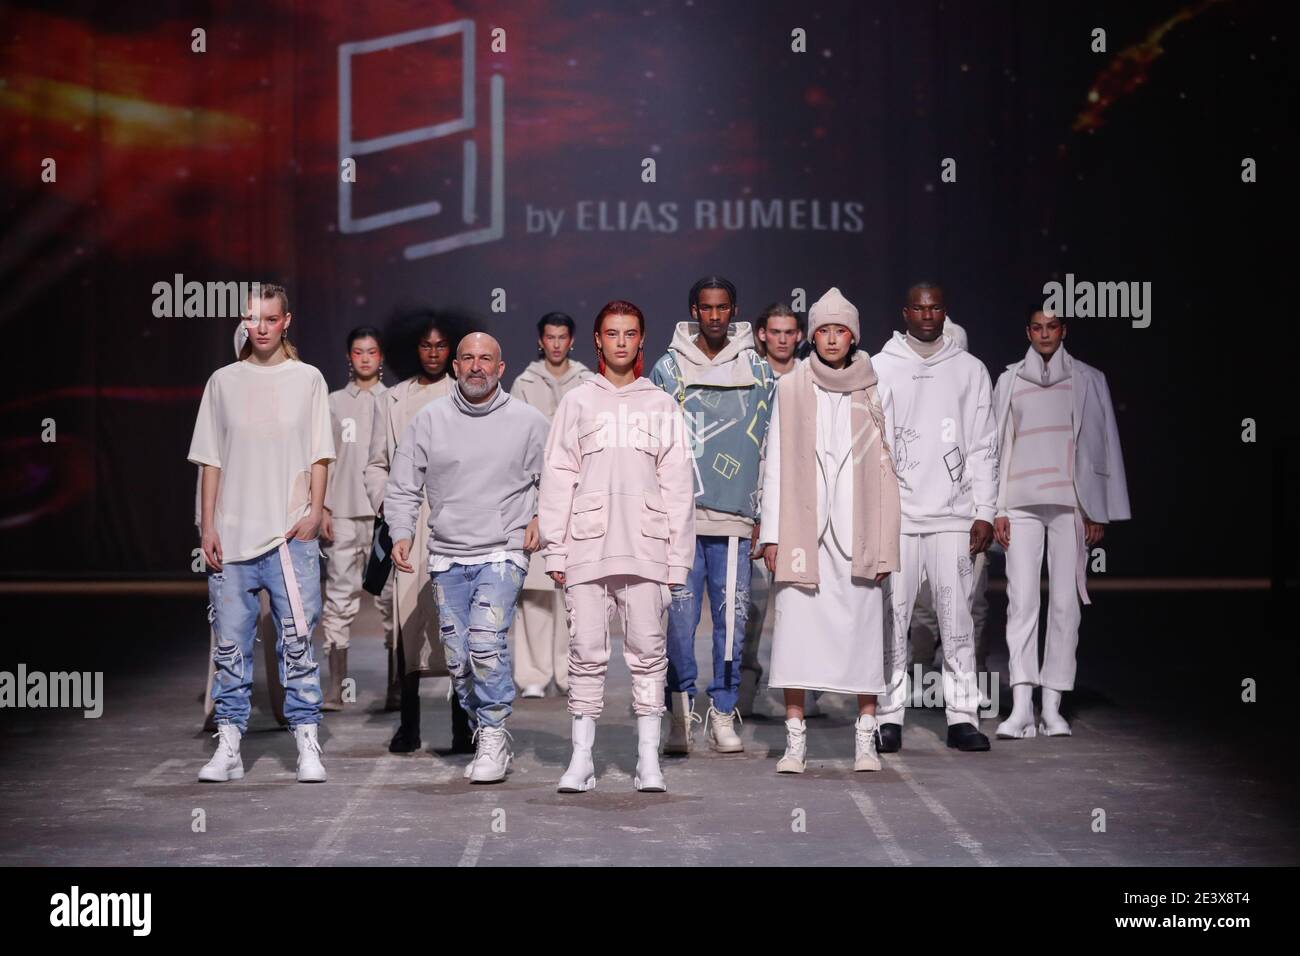 Berlin, Germany. 20th Jan, 2021. Designer Elias Rumelis shows off with  models after his show on the catwalk he presented his collection for the  fall/winter season 2021/2022 at the Mercedes-Benz Fashion Week